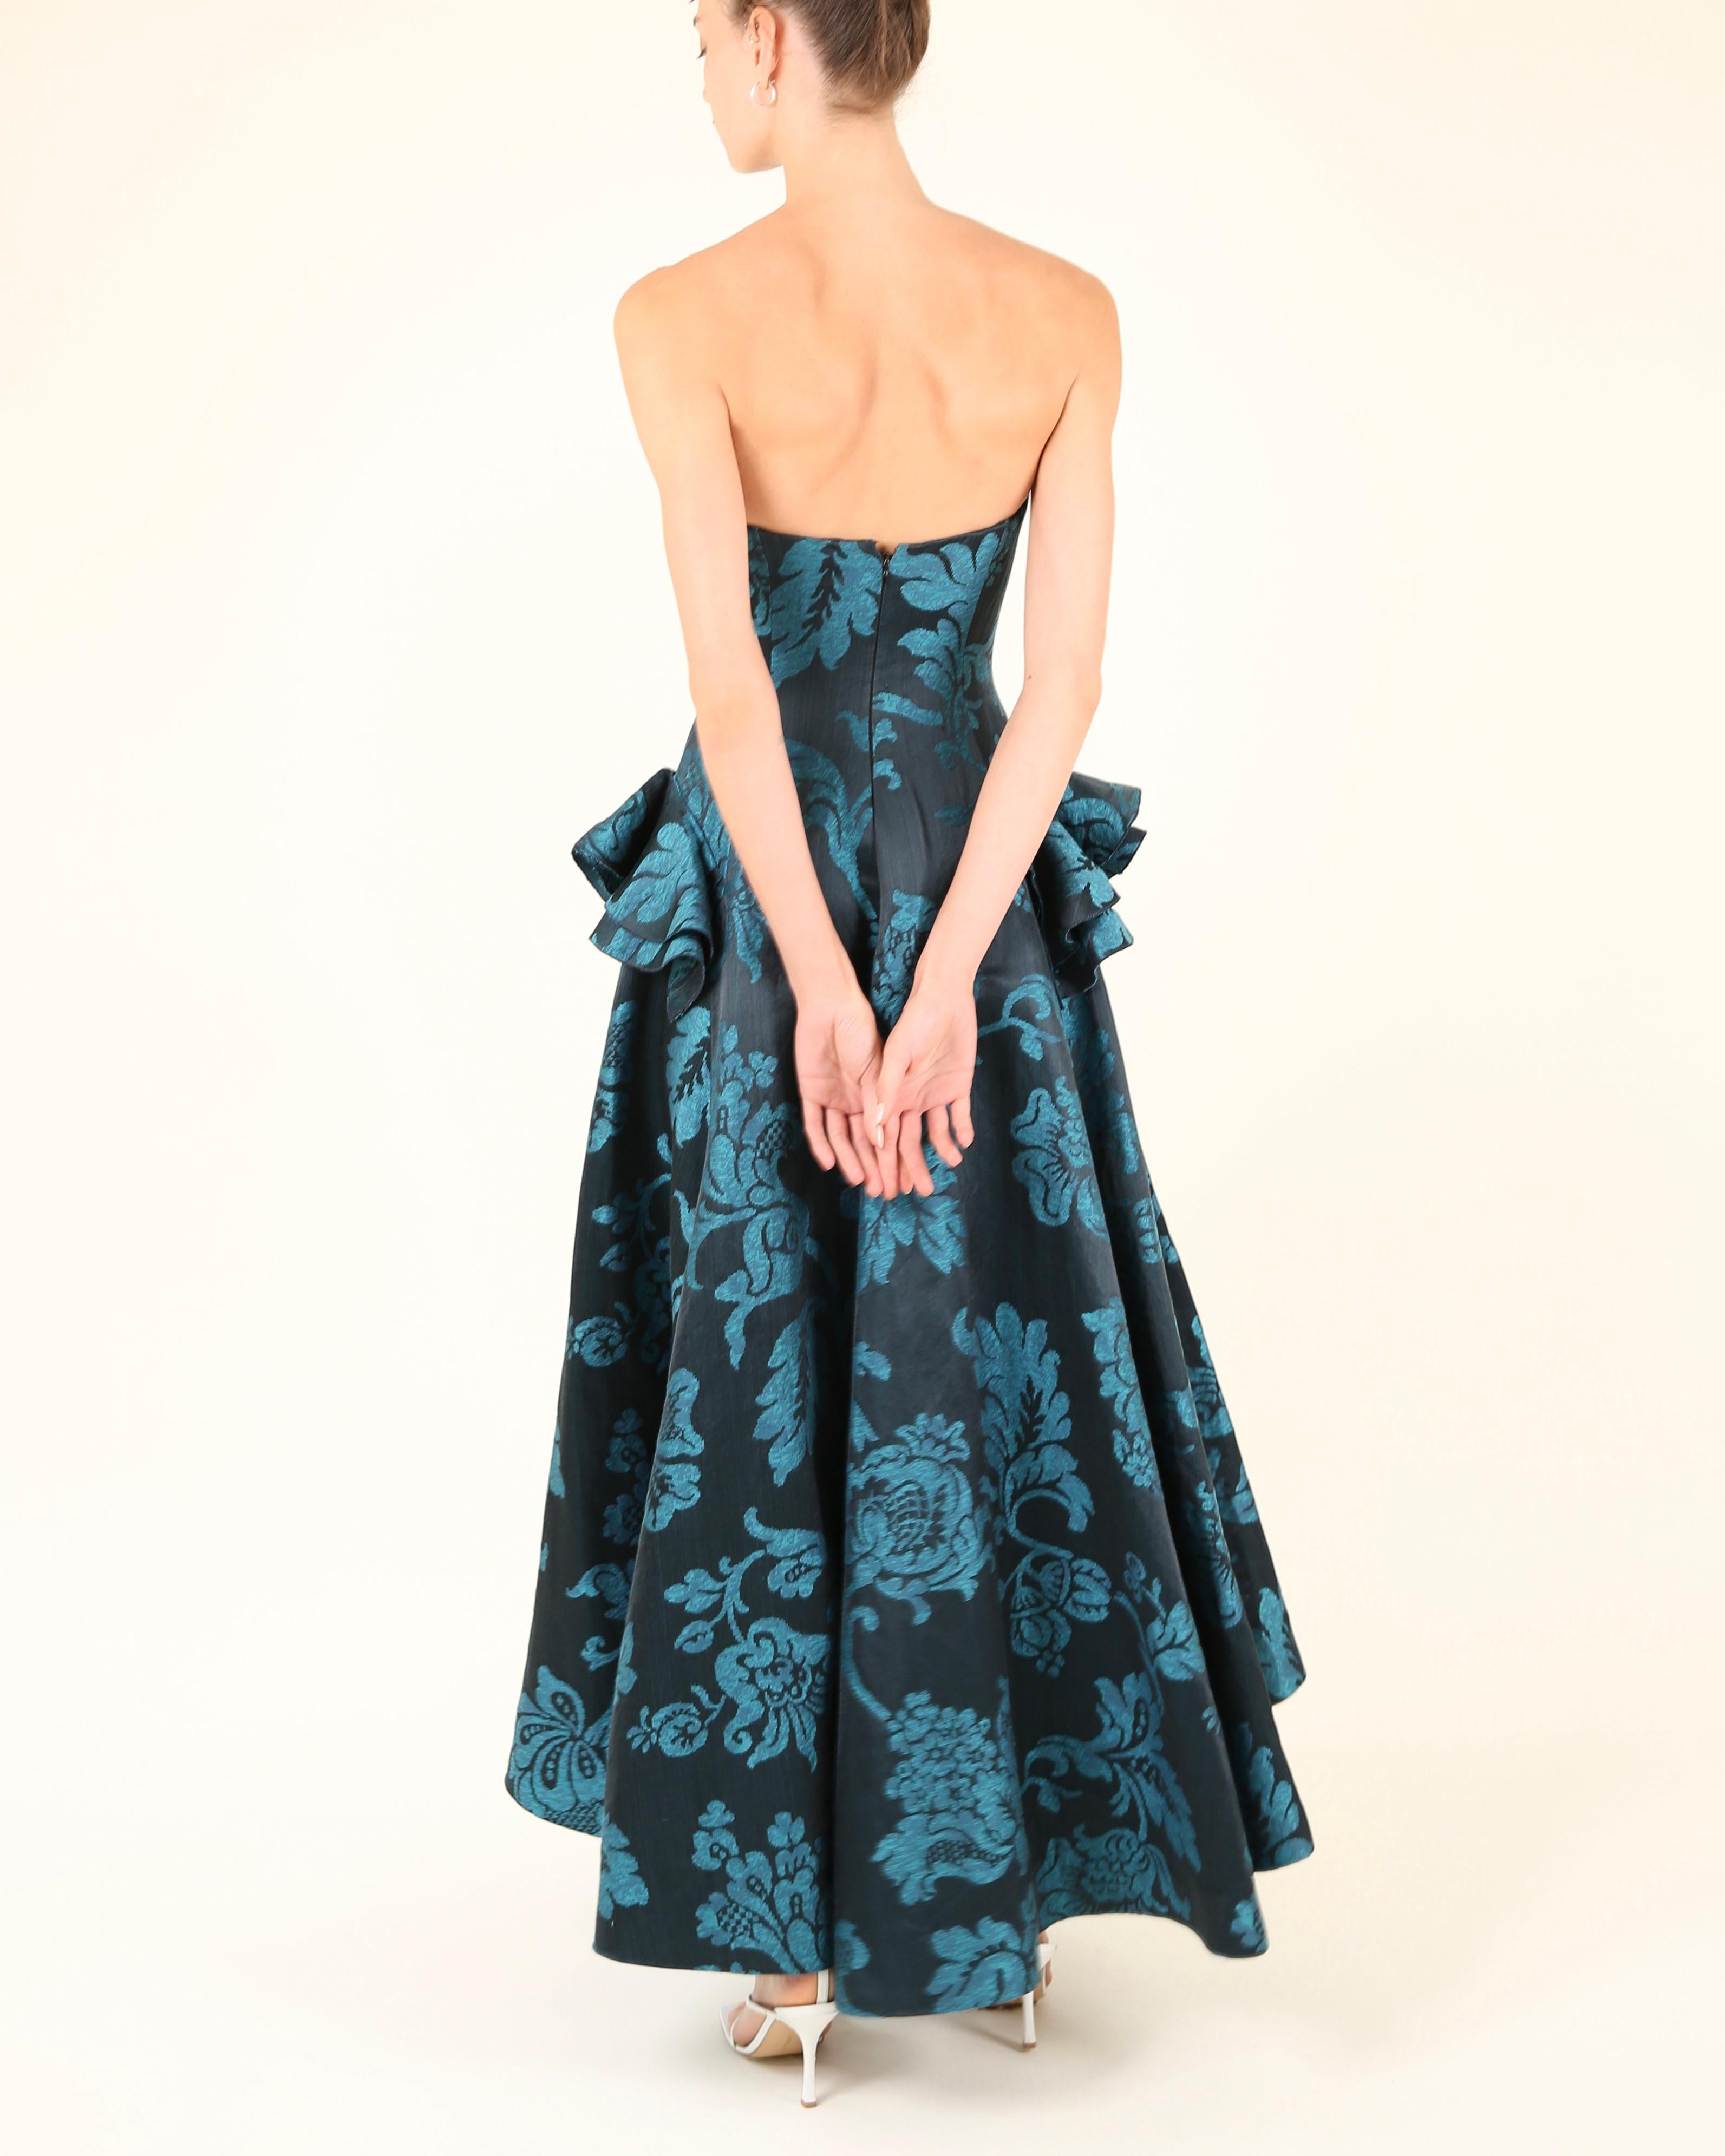 Oscar de la Renta F/W06 strapless floral blue teal fit and flare dress gown XS For Sale 13